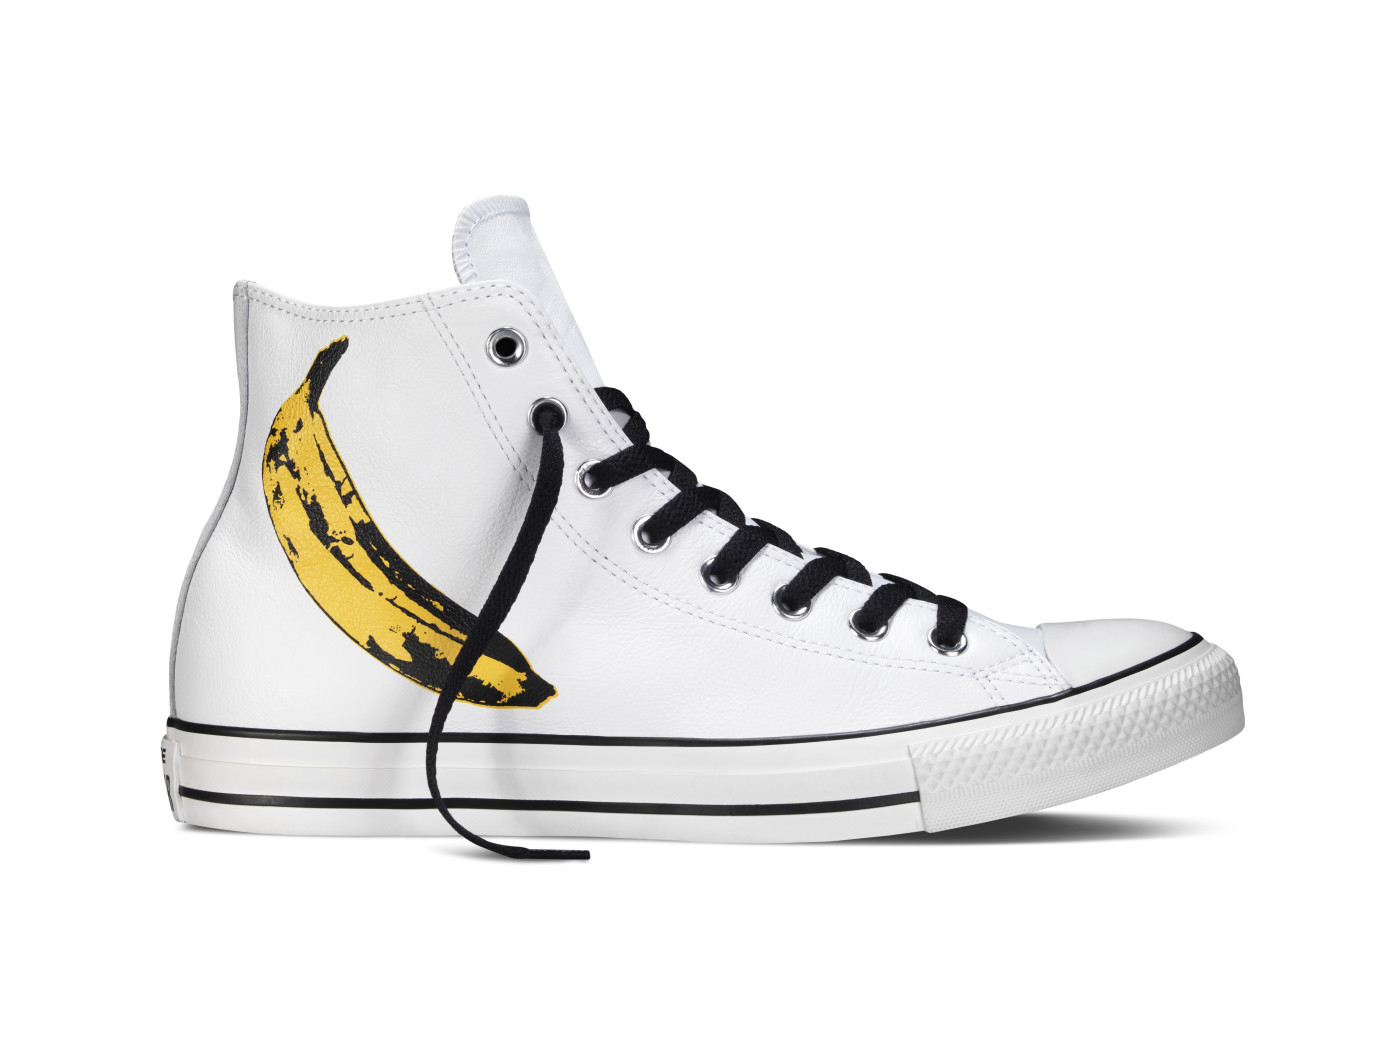 Converse releasing another tribute to the iconic pop artist ... لستك مسبح